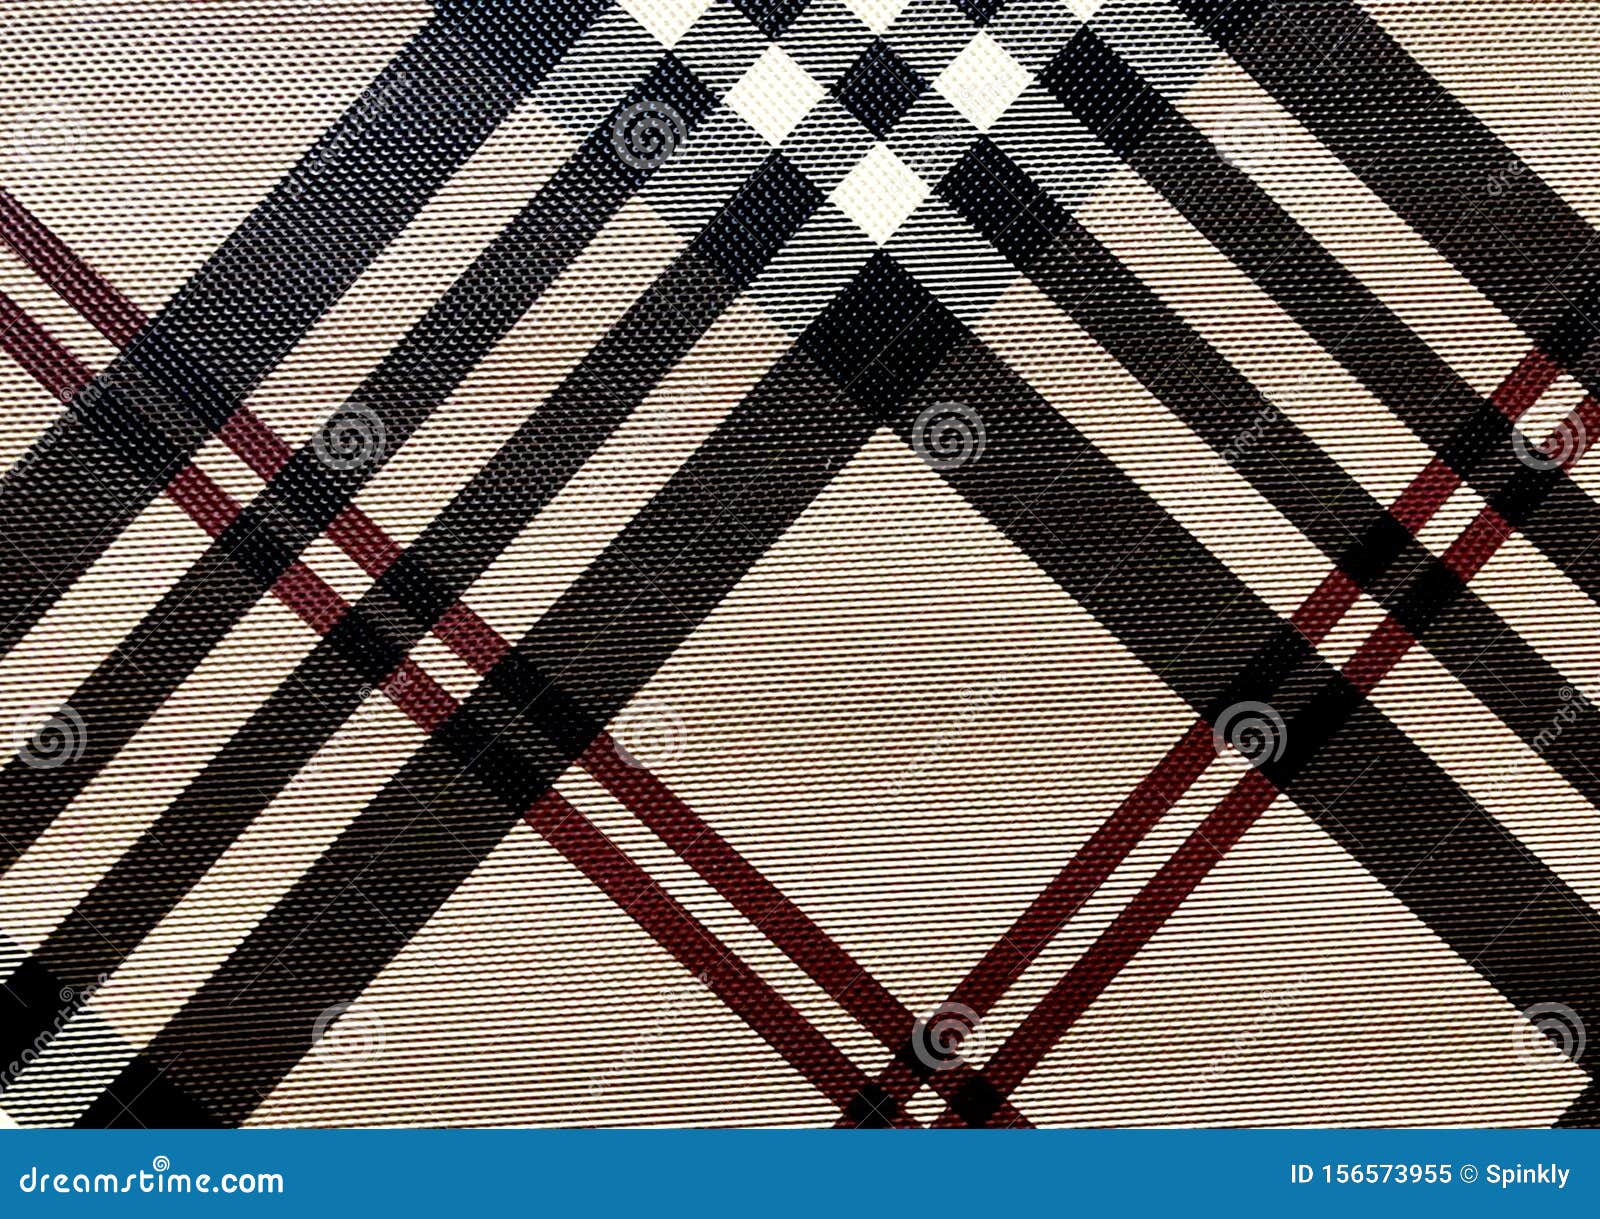 Buy Print a Wallpaper Burberry Wallpaper Online  Geometric Pattern  Wallpapers  Wallpapers  Furnishings  Pepperfry Product